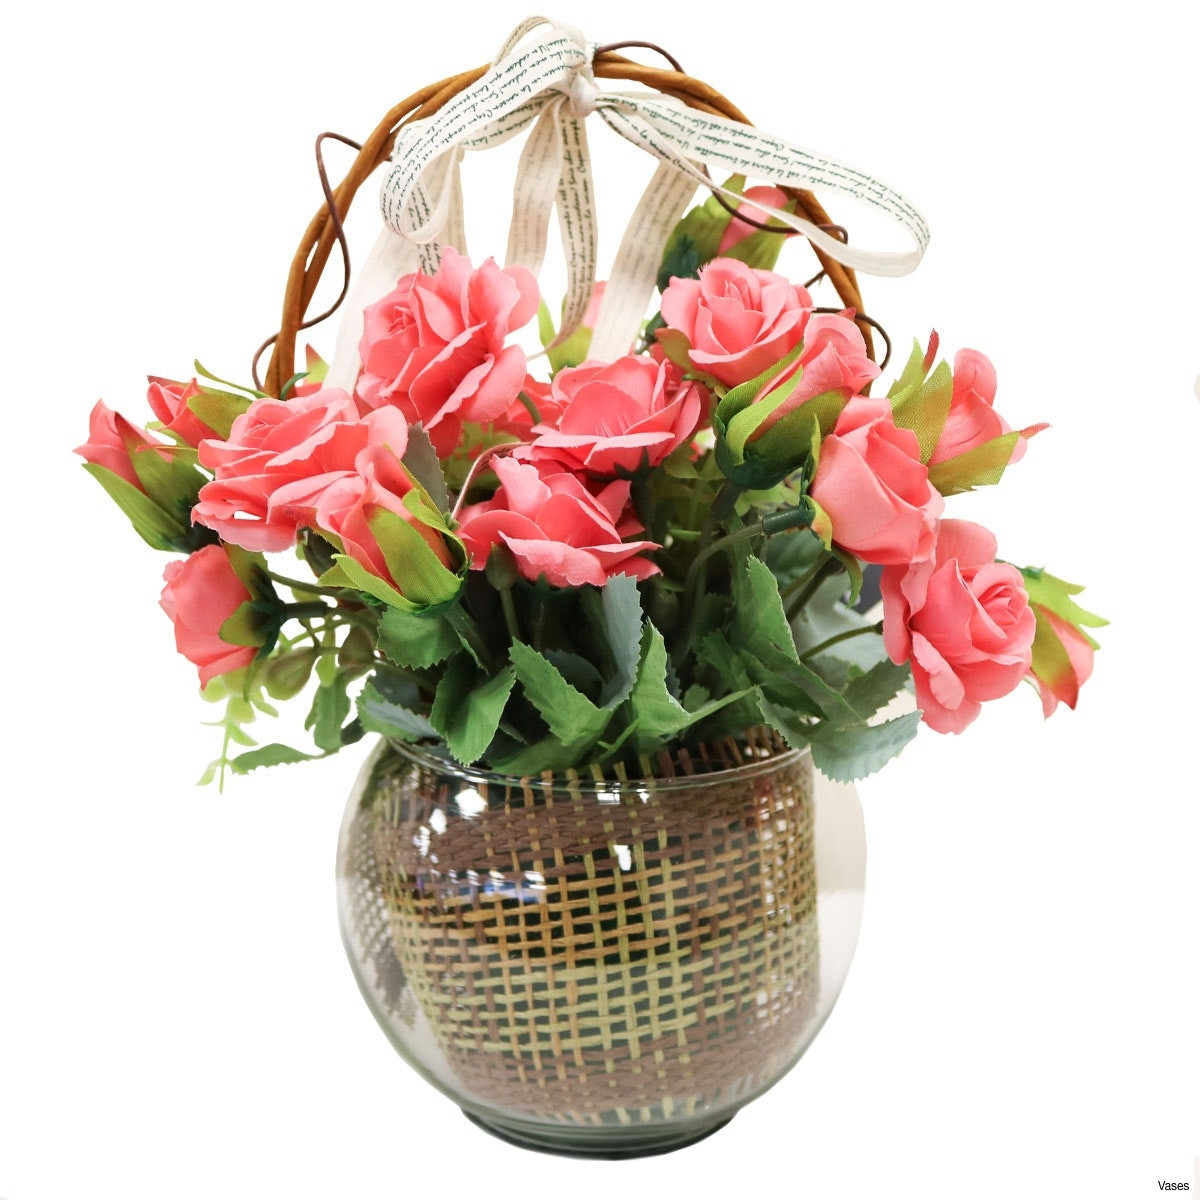 25 attractive Vase and Faux Flowers 2022 free download vase and faux flowers of 30 elegant flower basket decoration flower decoration ideas with bf142 11km 1200x1200h vases pink flower vase i 0d gold inspiration